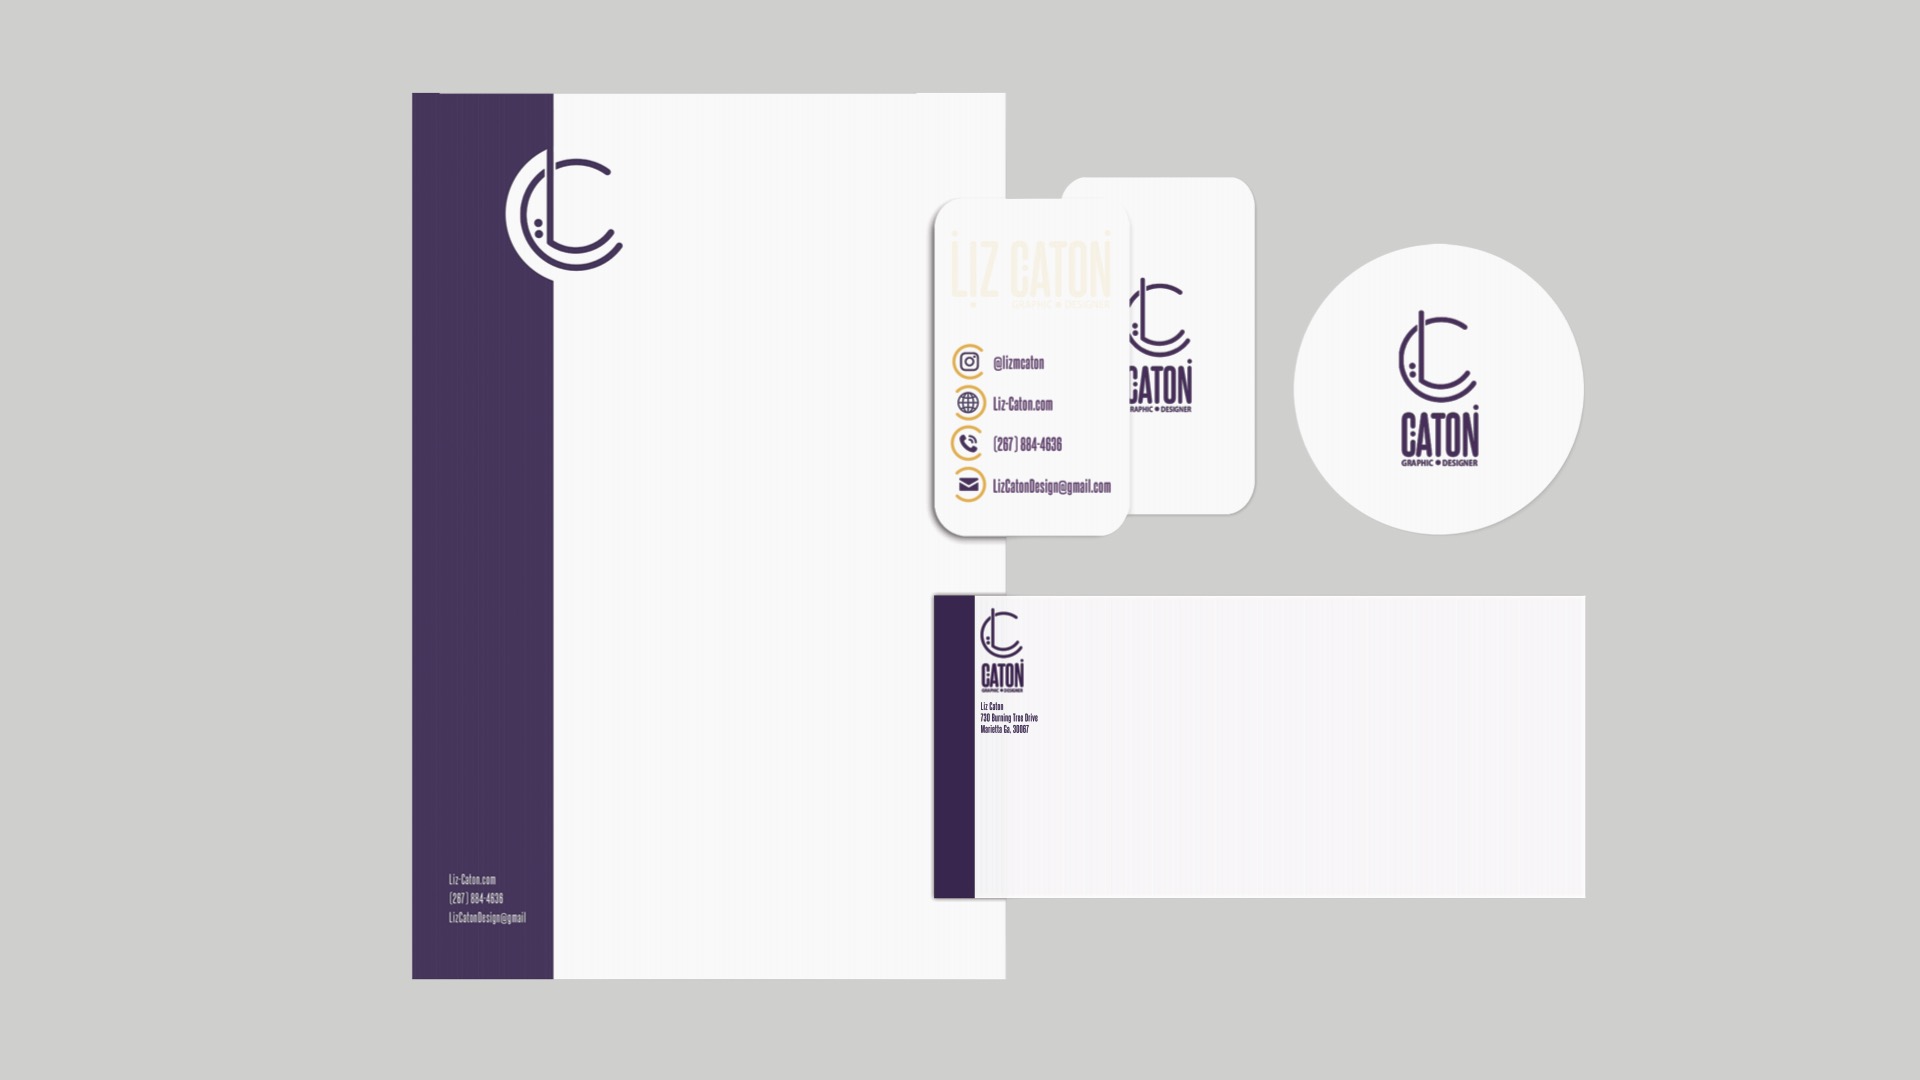  / “Stationary” company corporate ID, size varies print, 2022. This stationary includes a personalized logo, letterhead, business card, and envelope. 